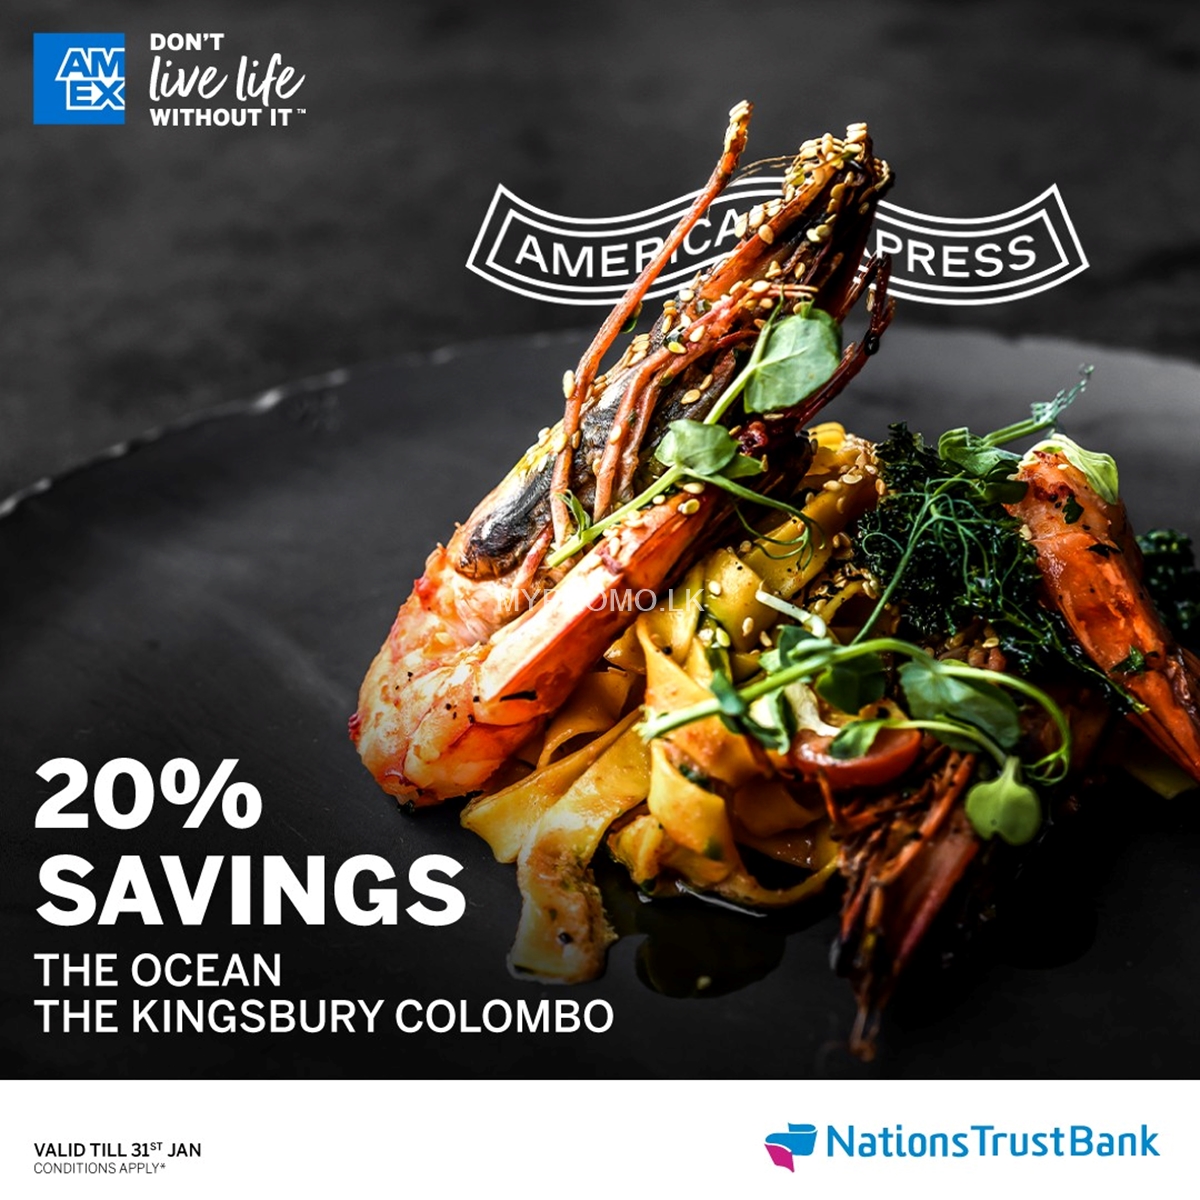 Enjoy 20% savings at The Ocean by The Kingsbury Colombo with Nations Trust Bank American Express.